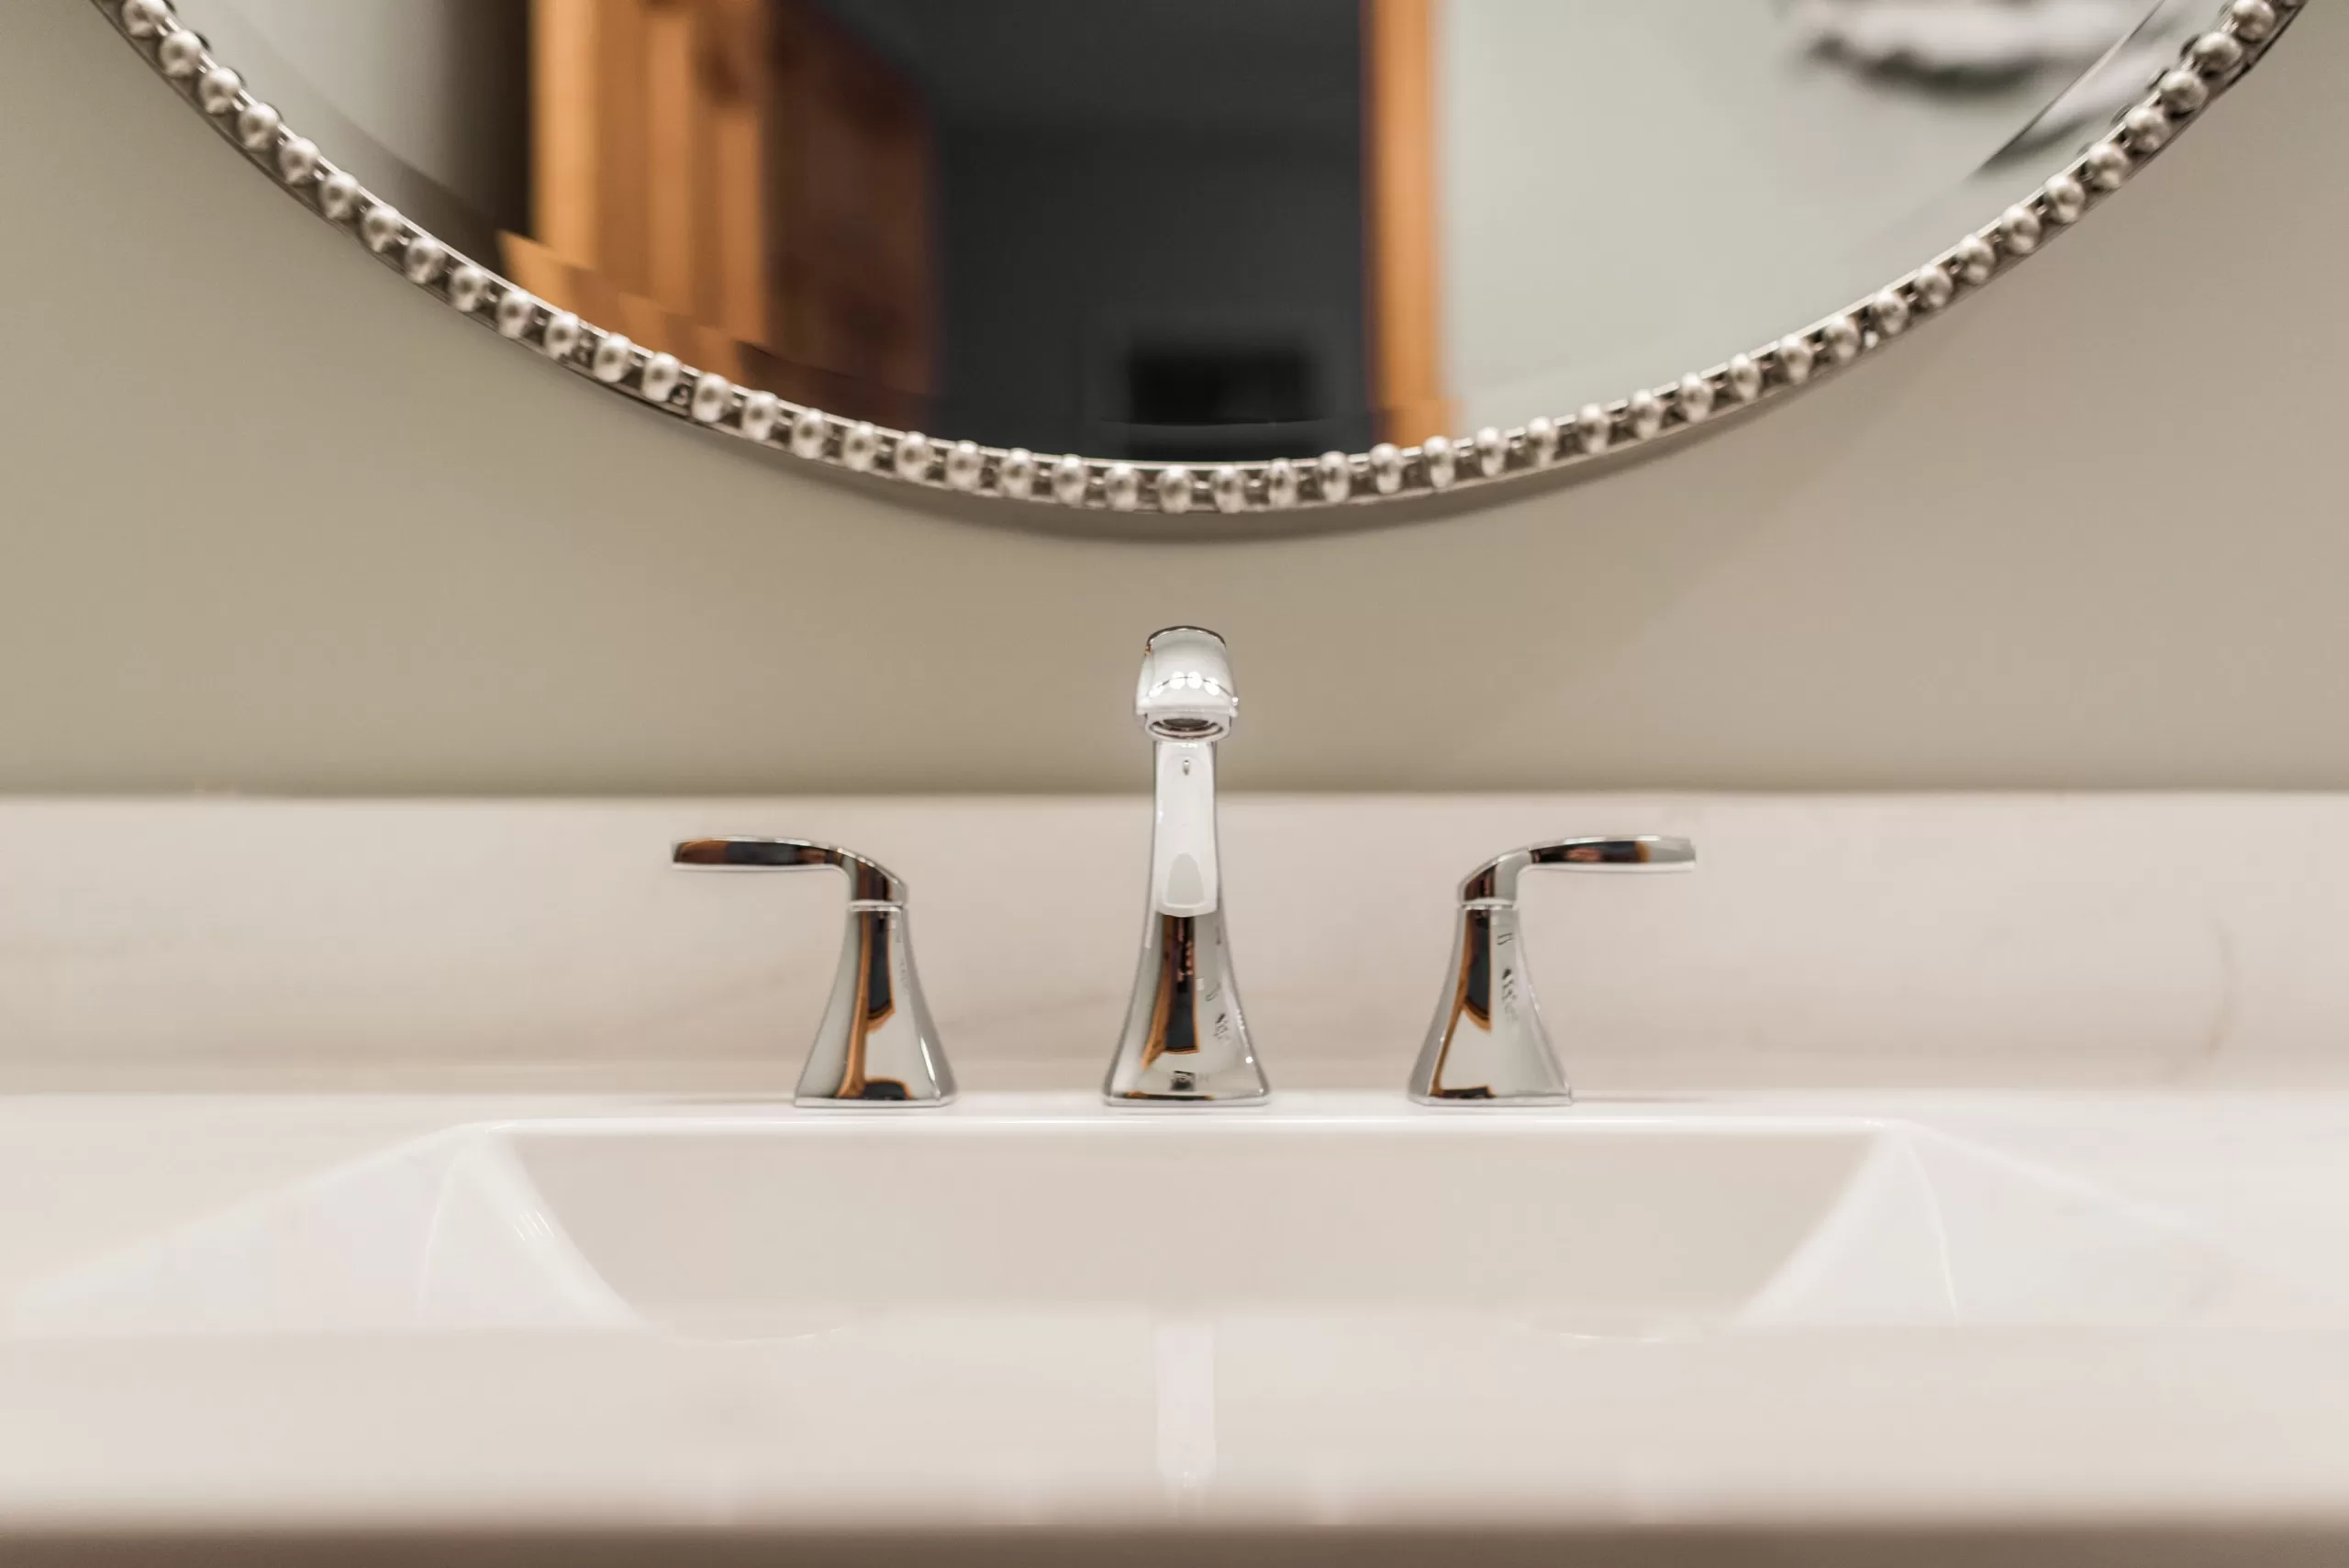 close up of faucet and sink in bathroom remodel